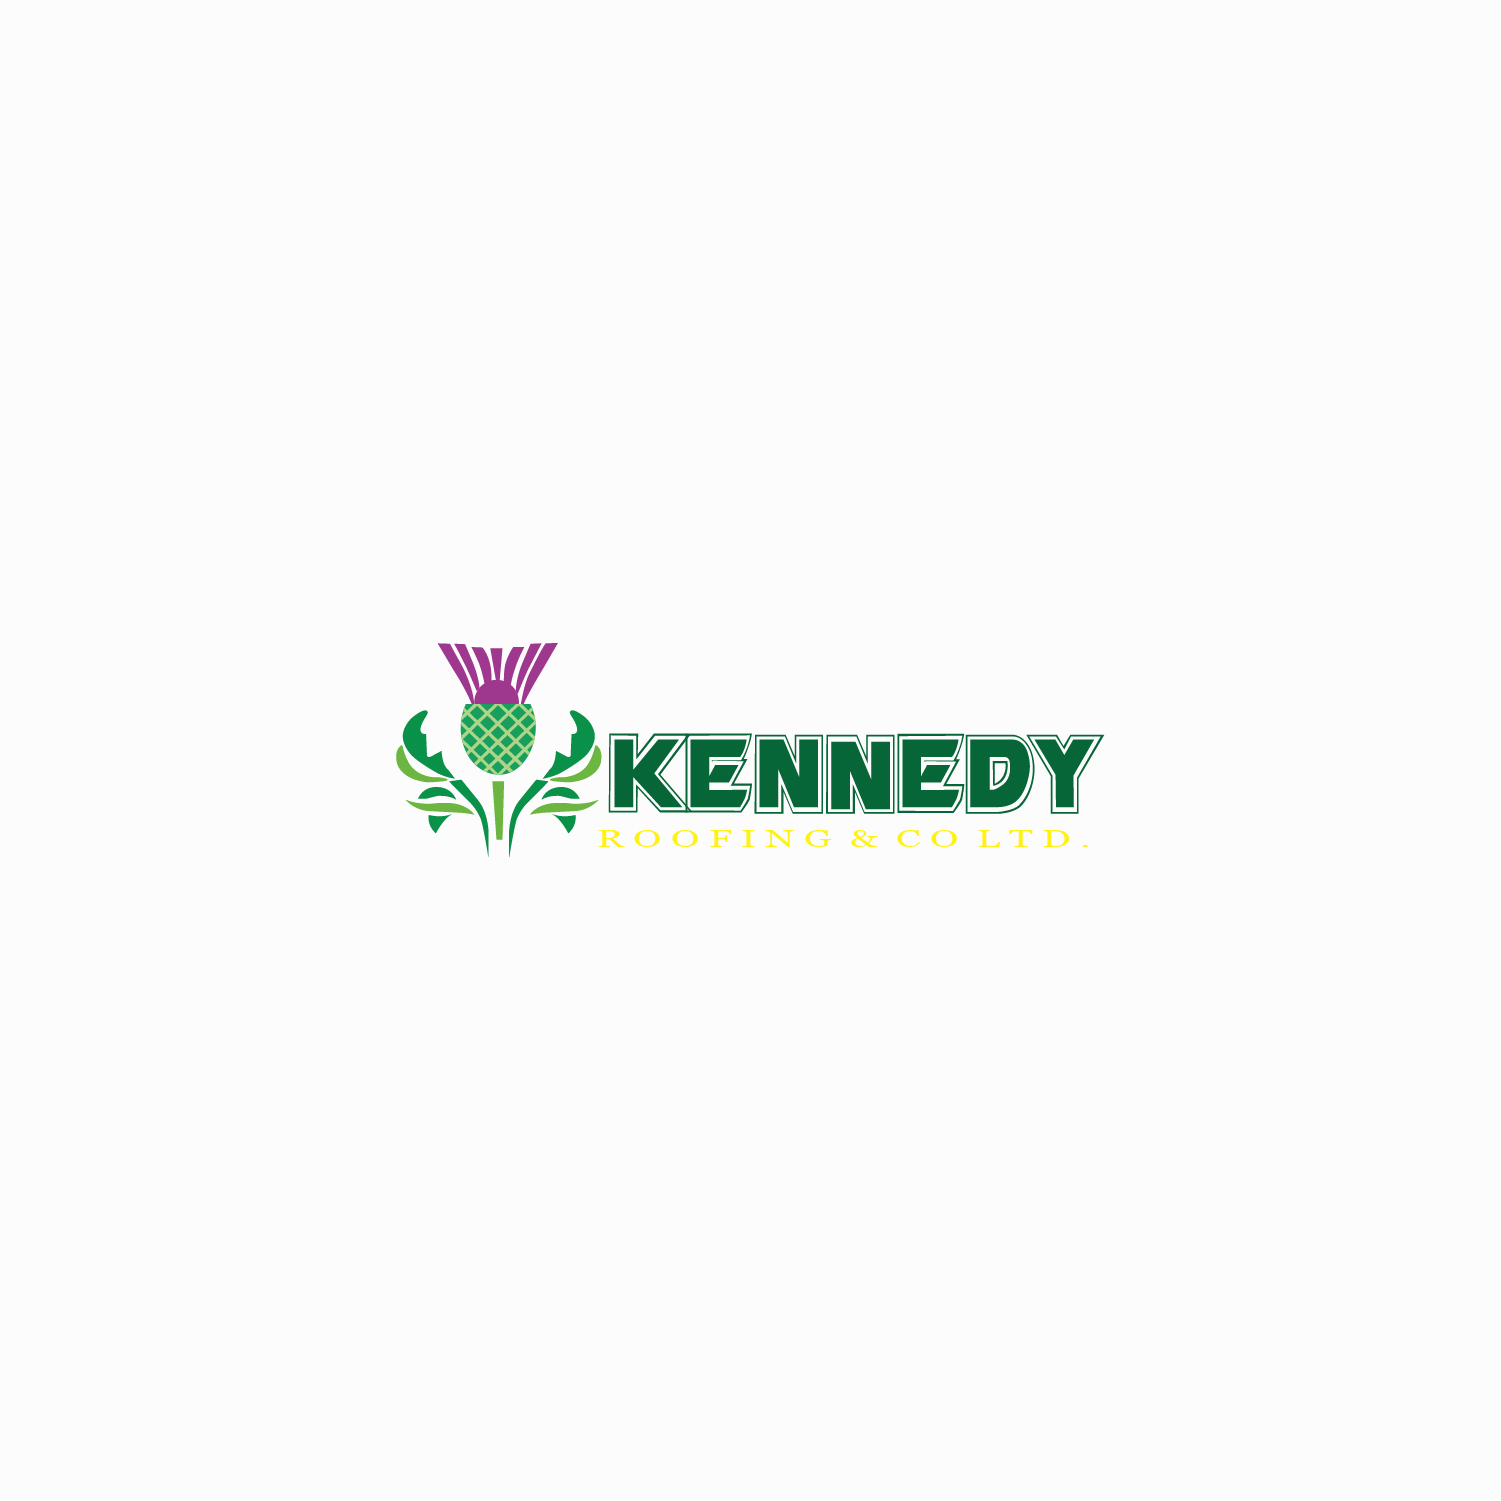 Logo of Kennedy Roofing Yorkshire